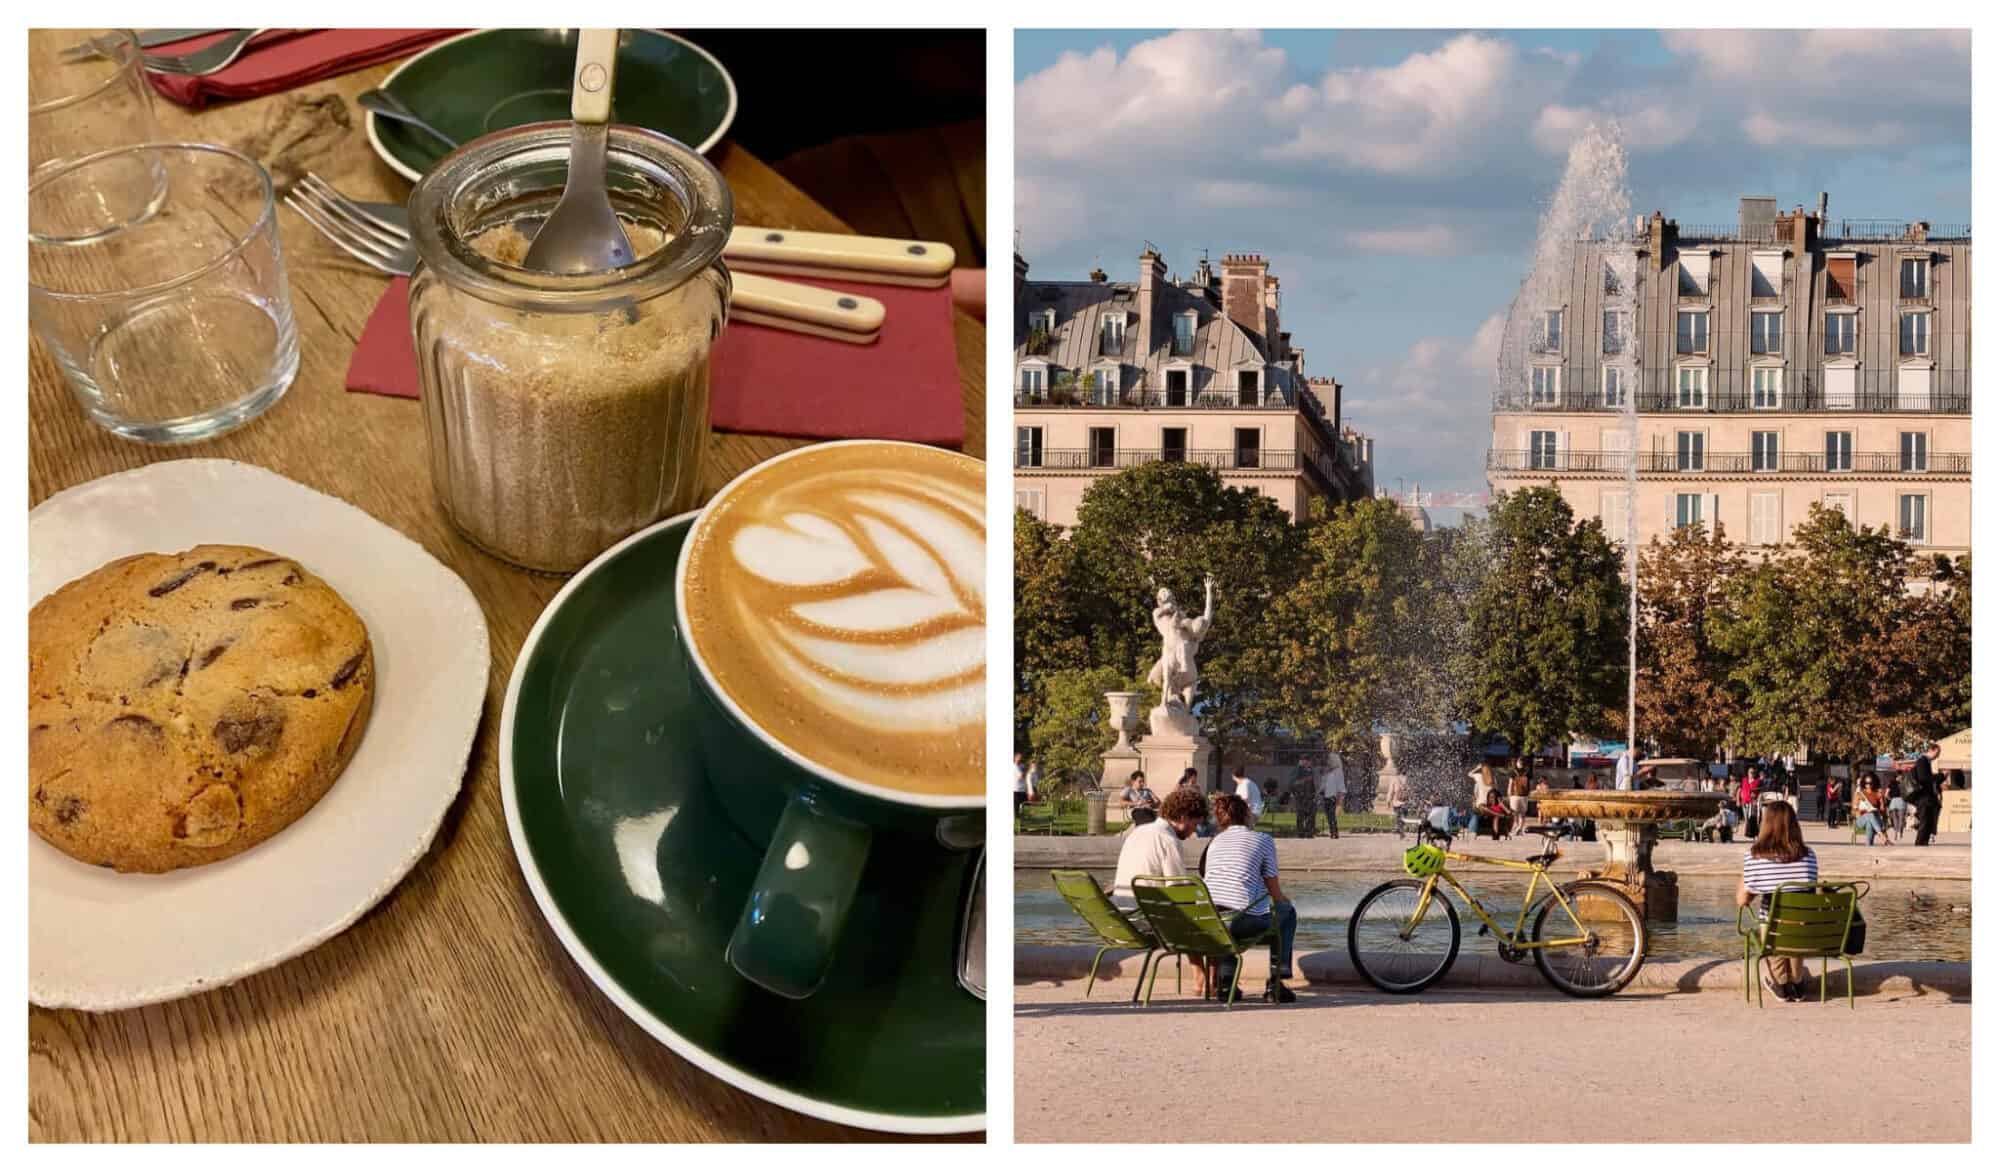 Left: A brown circular cookie, a cup of coffee, and a jar of brown sugar are served in coffee shop Gramme Paris; Right: Parisians sitting in green chairs in front of a fontaine in Tuileries Garden in Paris.